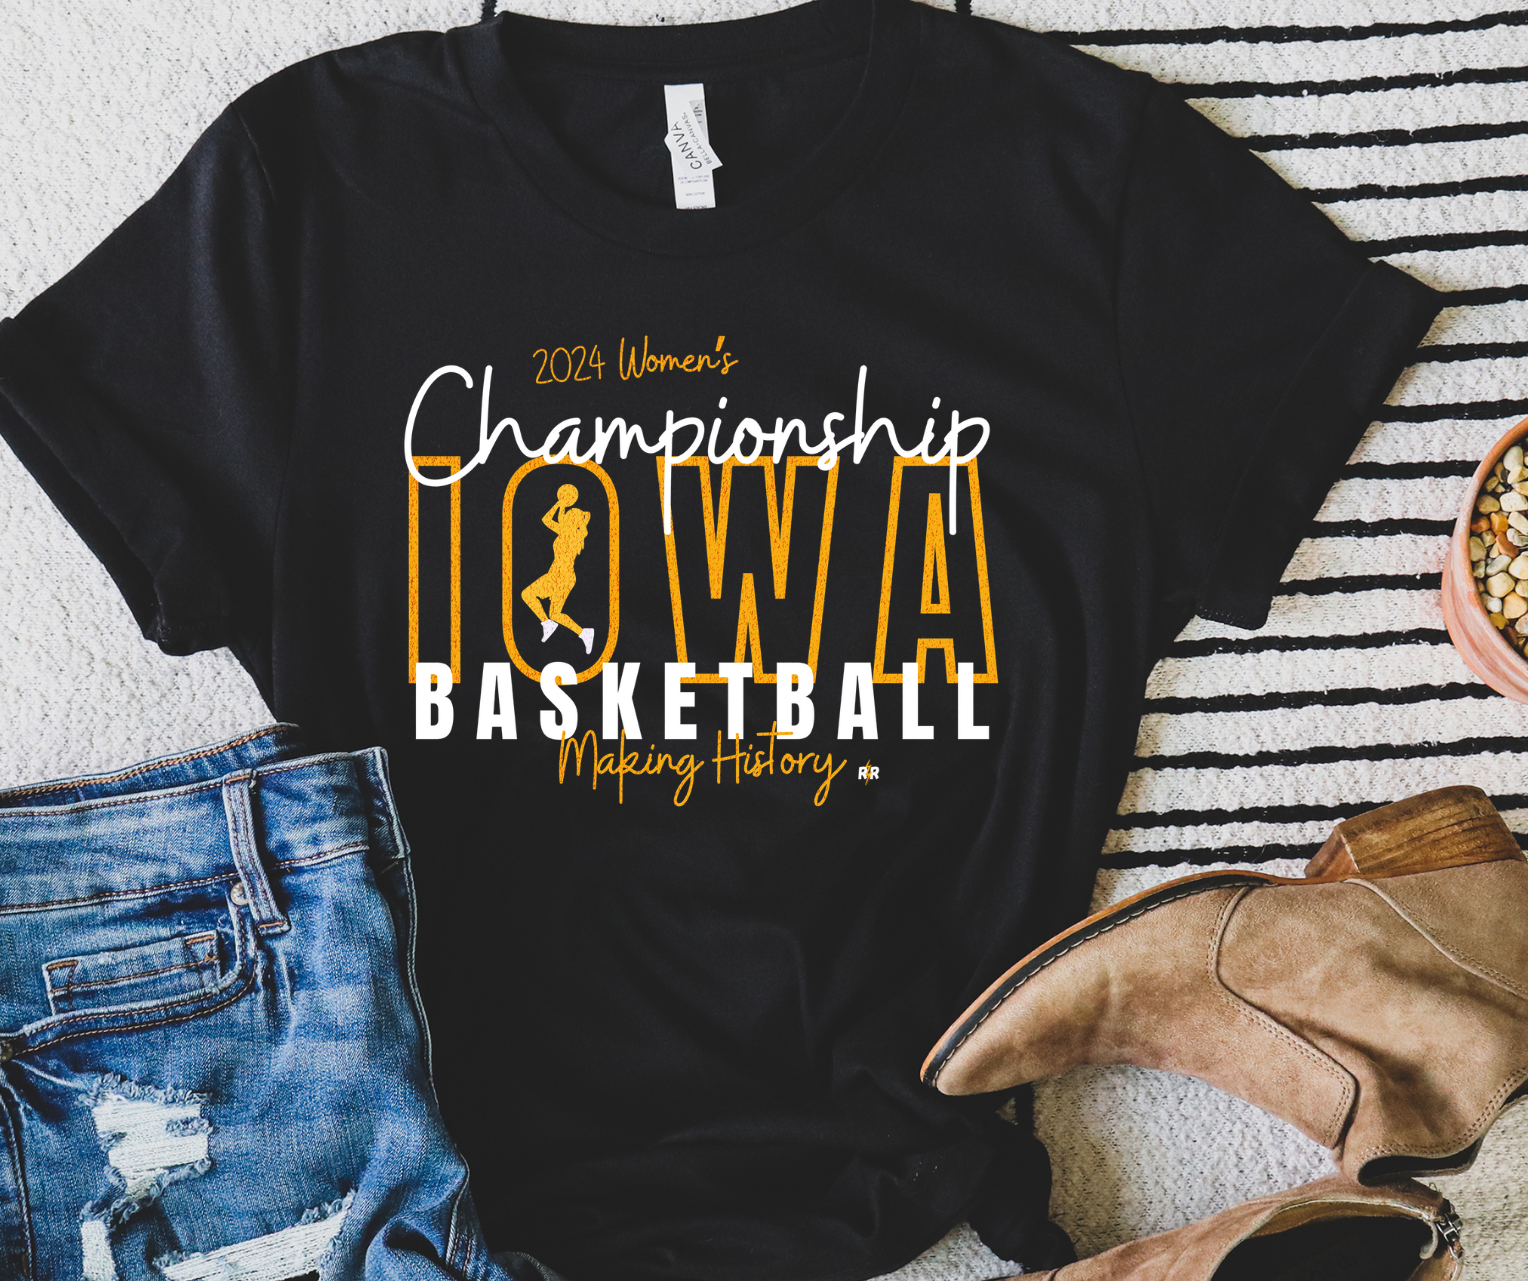 2024 Women's Championship Iowa Basketball Black Graphic Tee - The Red Rival